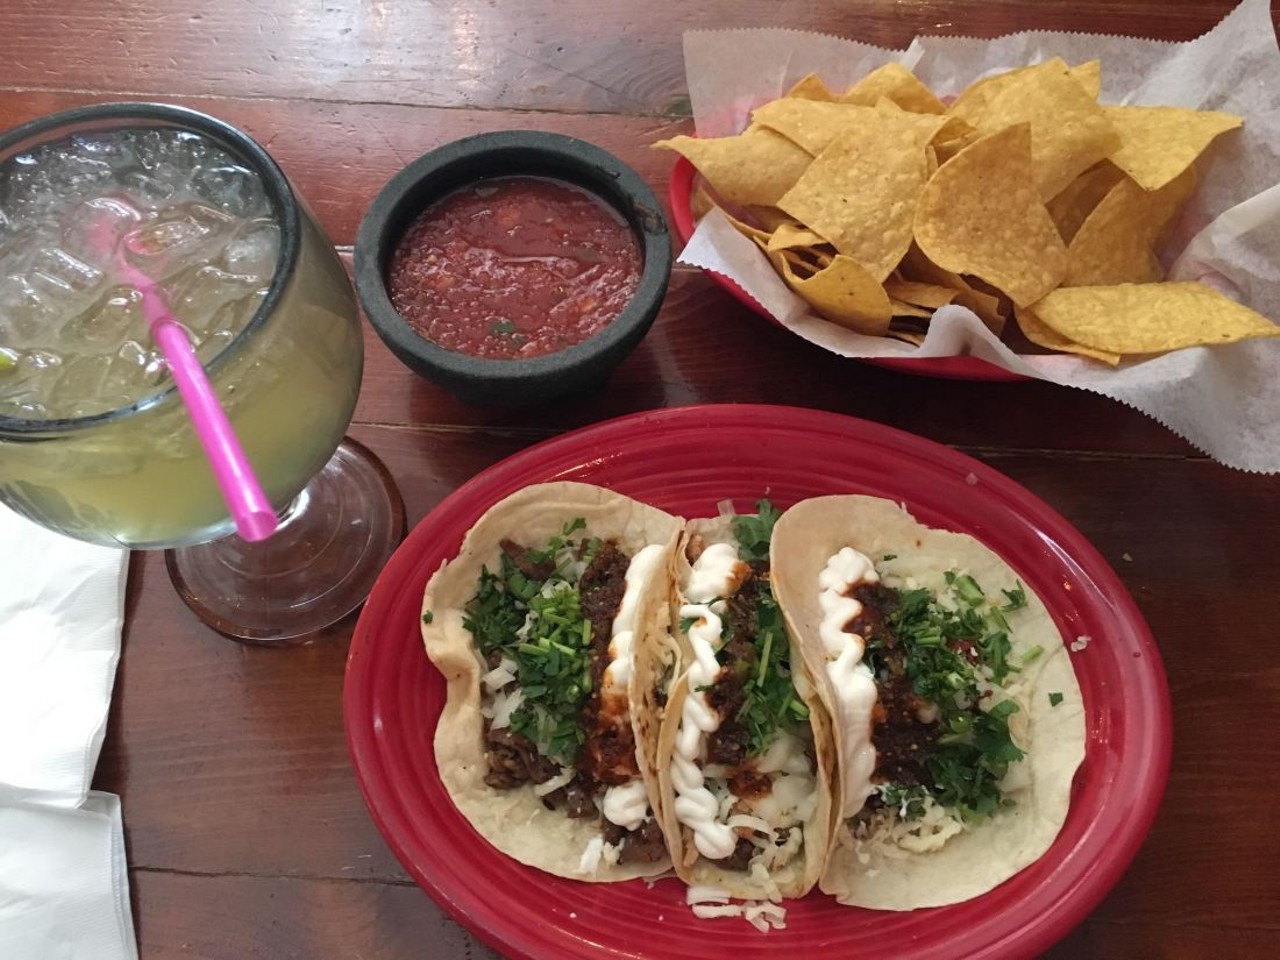 Best Dollar Tacos: El Jalape&ntilde;os
1313 W. 117th St., 216-226-9765
Laura&#146;s take: Actually, they're $1.25 all night (and every other night of the week during happy hour), but they're delicious, with many options, and a salsa bar to dress them up yourself.  Everything in the picture costs less than $10.
